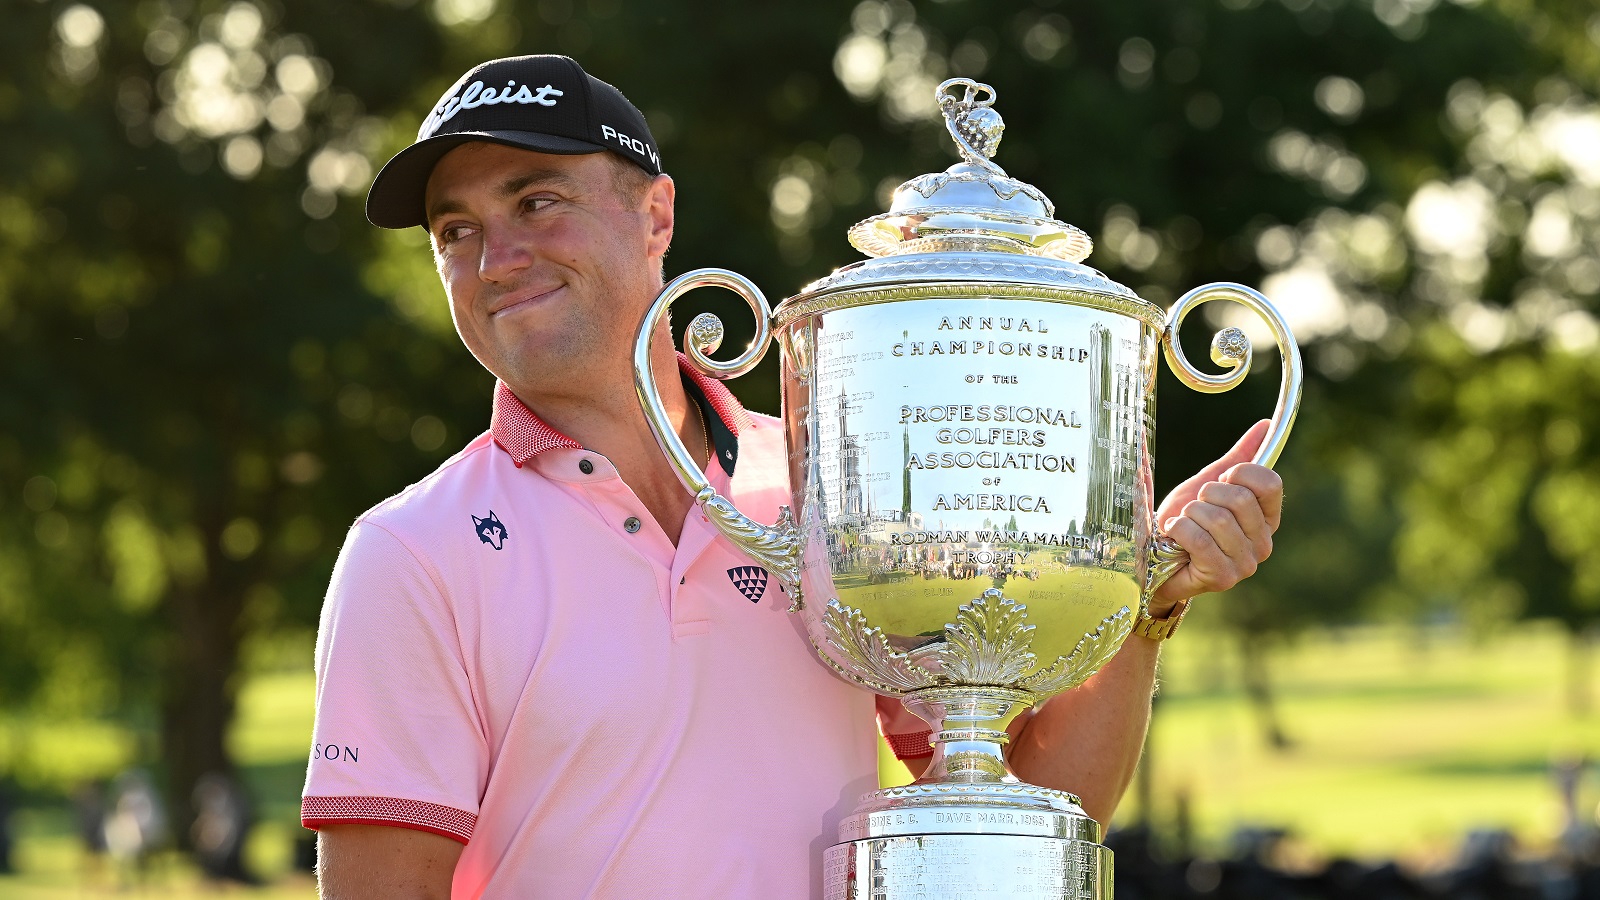 Justin Thomas celebrates with the Wanamaker Trophy after the final round of the PGA Championship at Southern Hills Country Club on May 22, 2022 in Tulsa, Oklahoma.